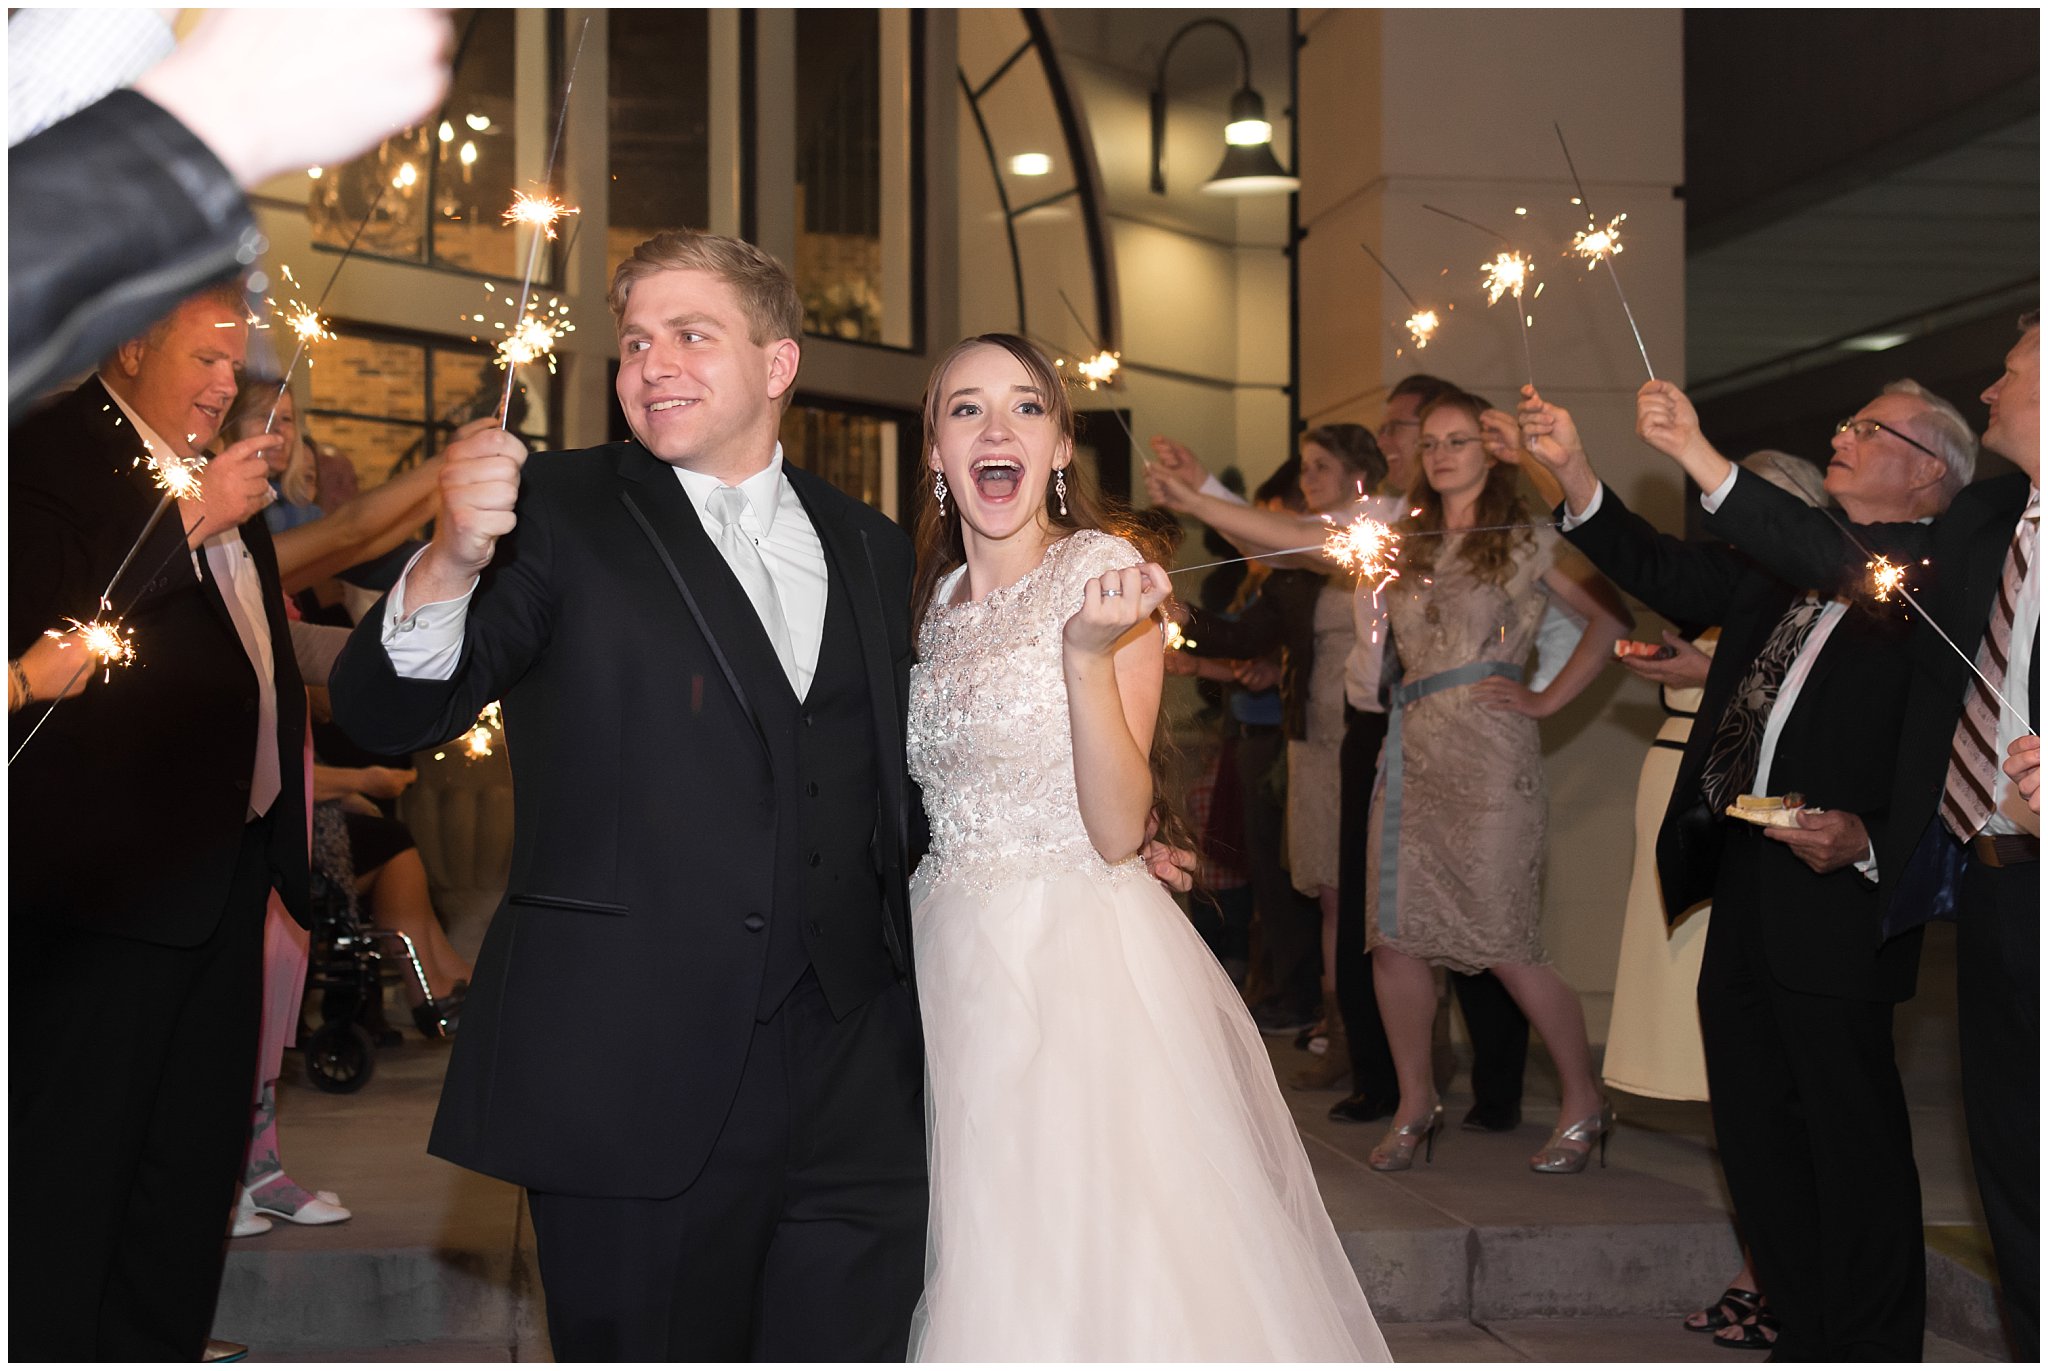 Bride and groom sparkler exit | Sparkler exit, detail shot of sparklers, wedding exit | The Grand View | Jessie and Dallin Photography